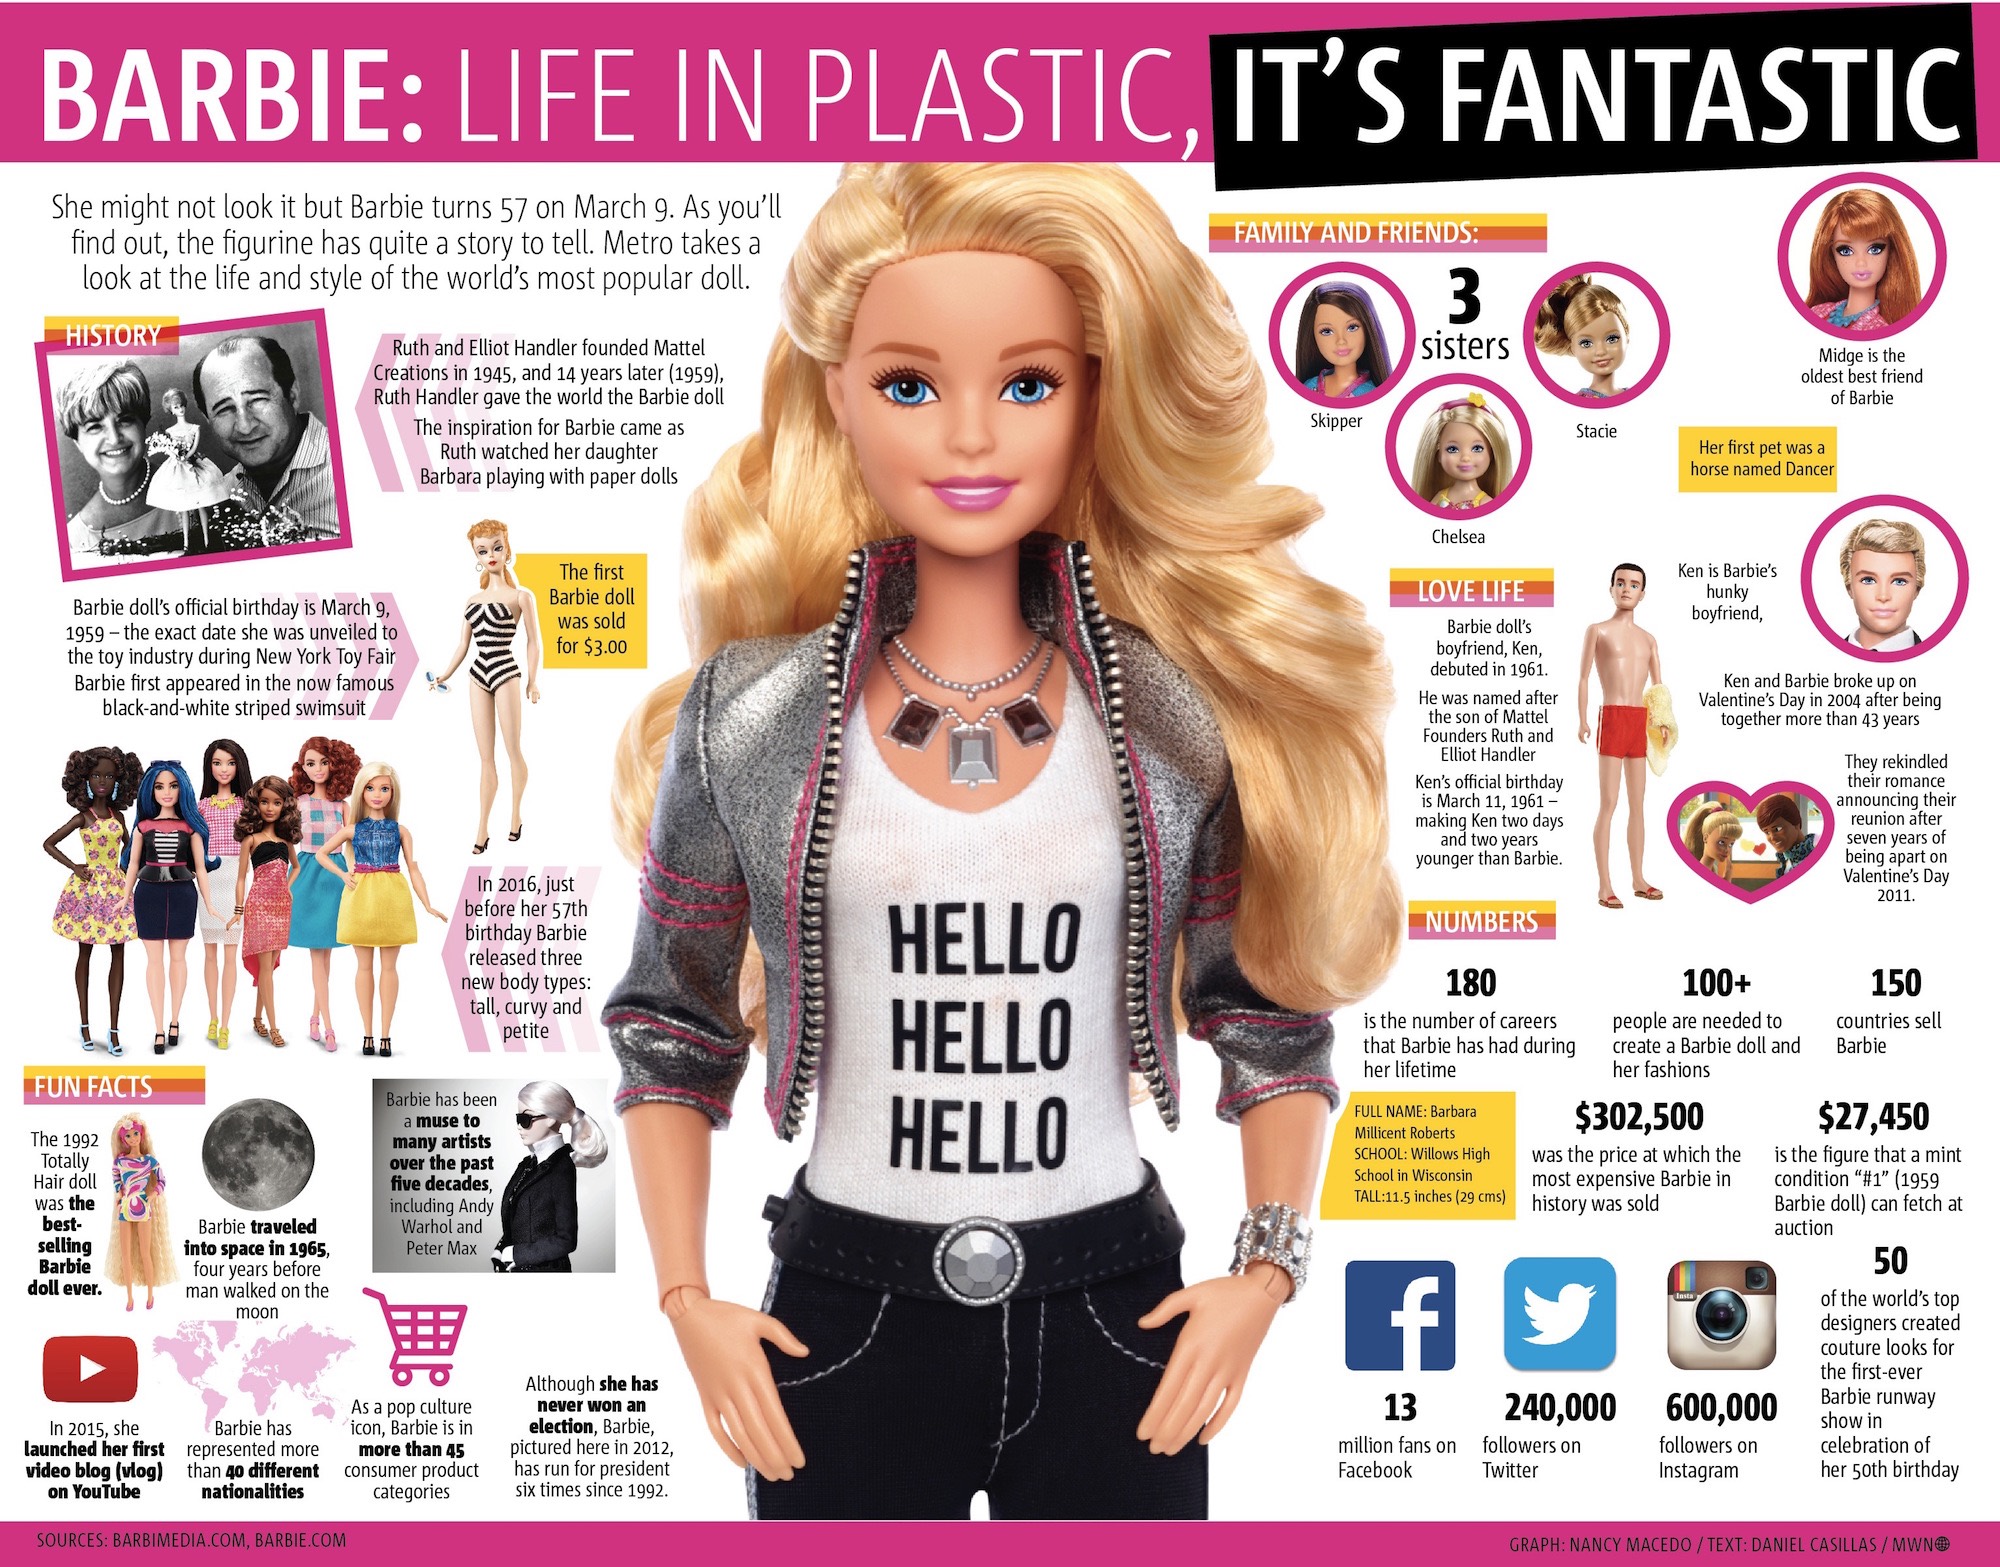 Barbie Facts Figures And History You Didn’t Know For Her 57th Birthday Metro Us